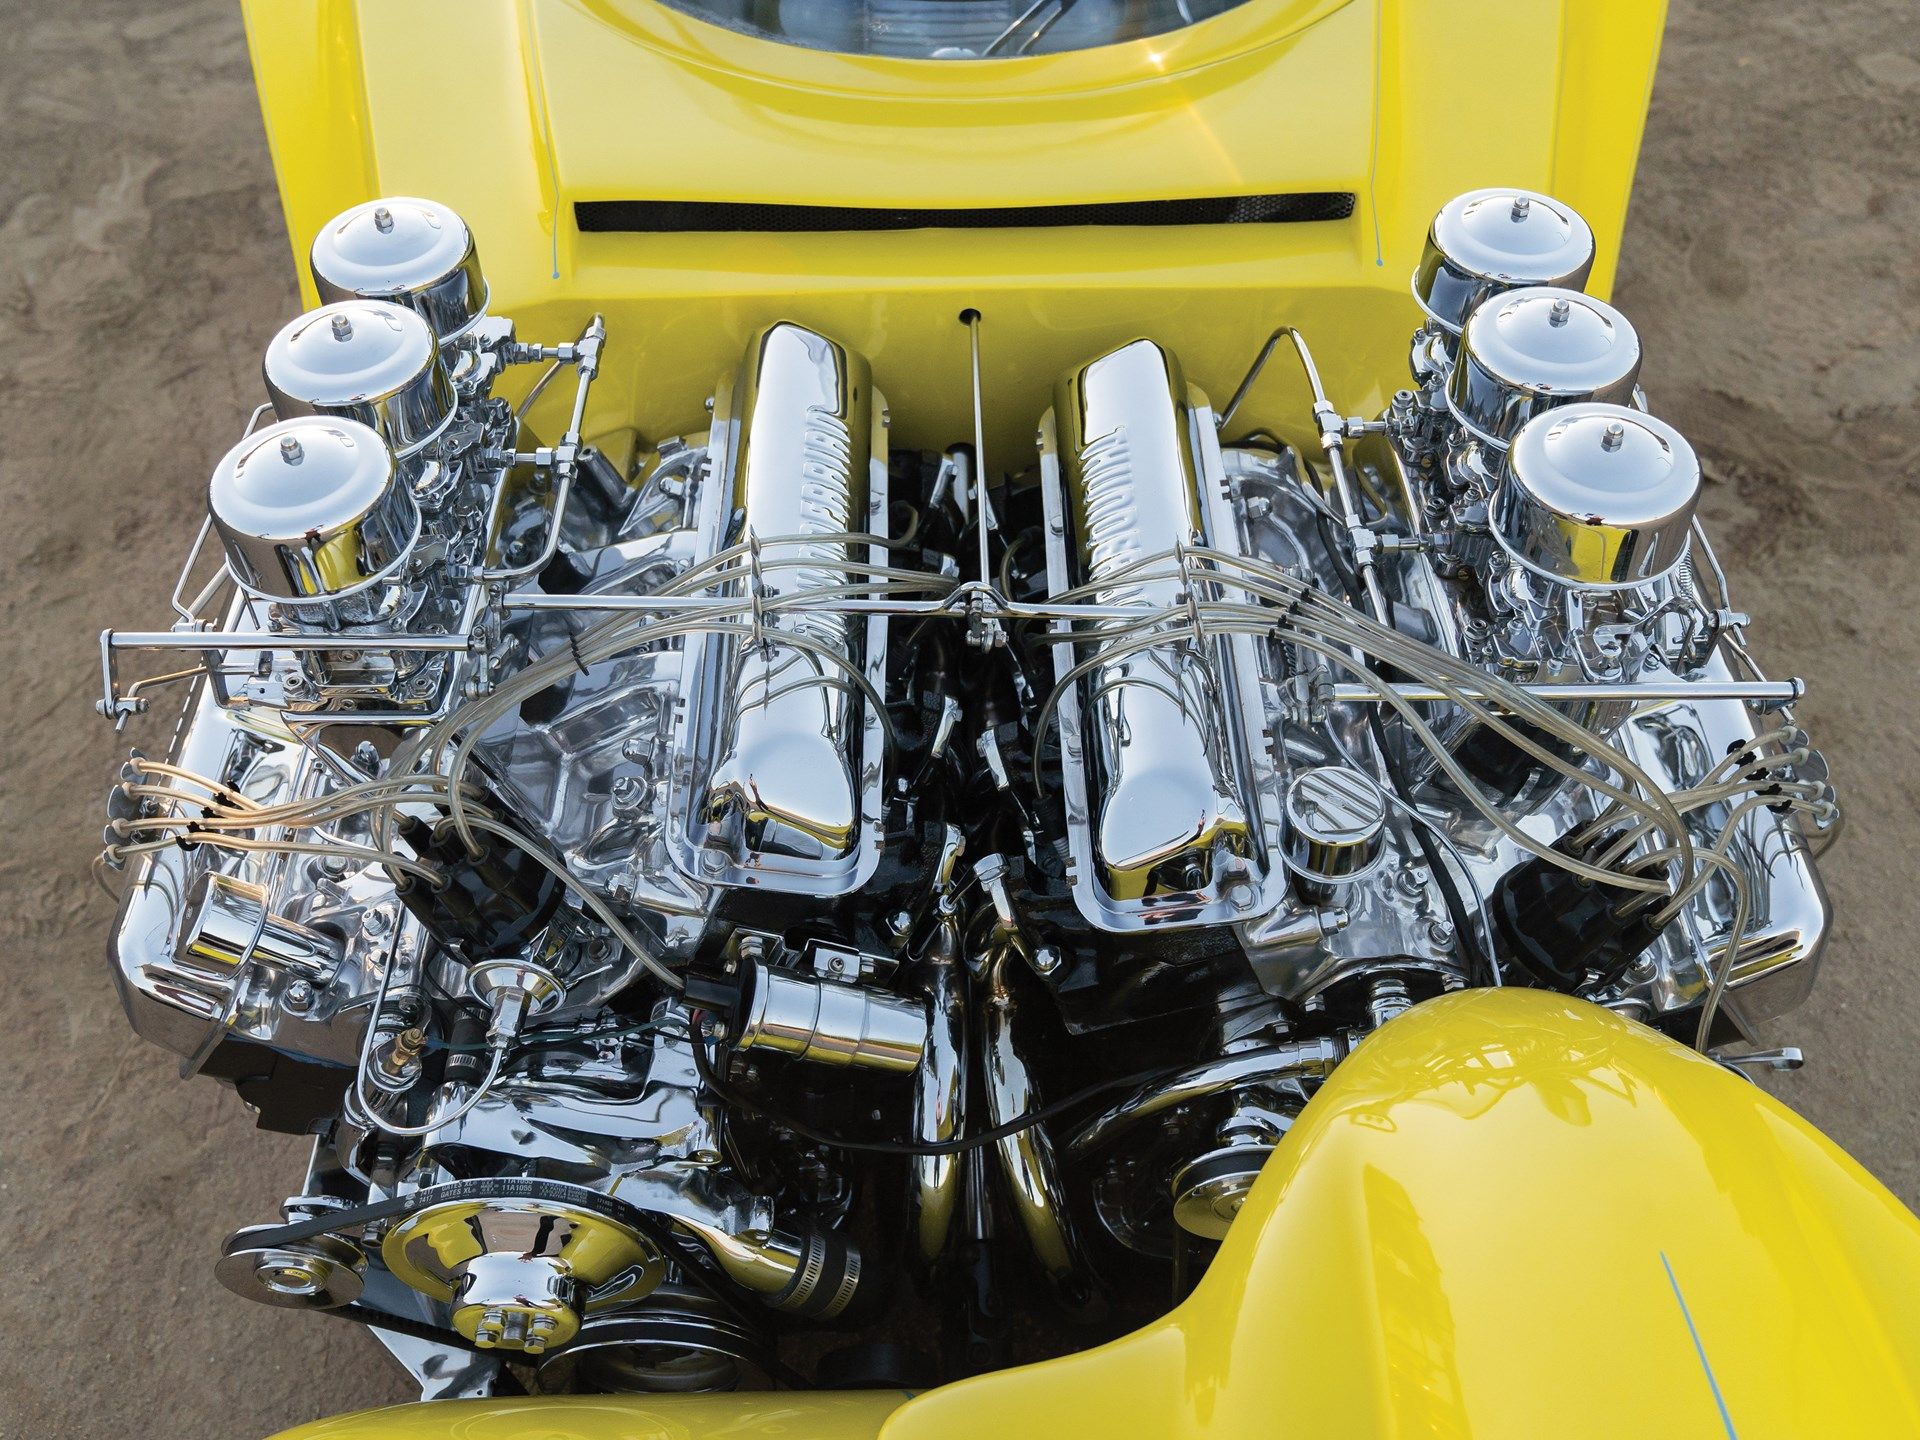 donated Ford Thunderbird 390-cubic-inch V8s